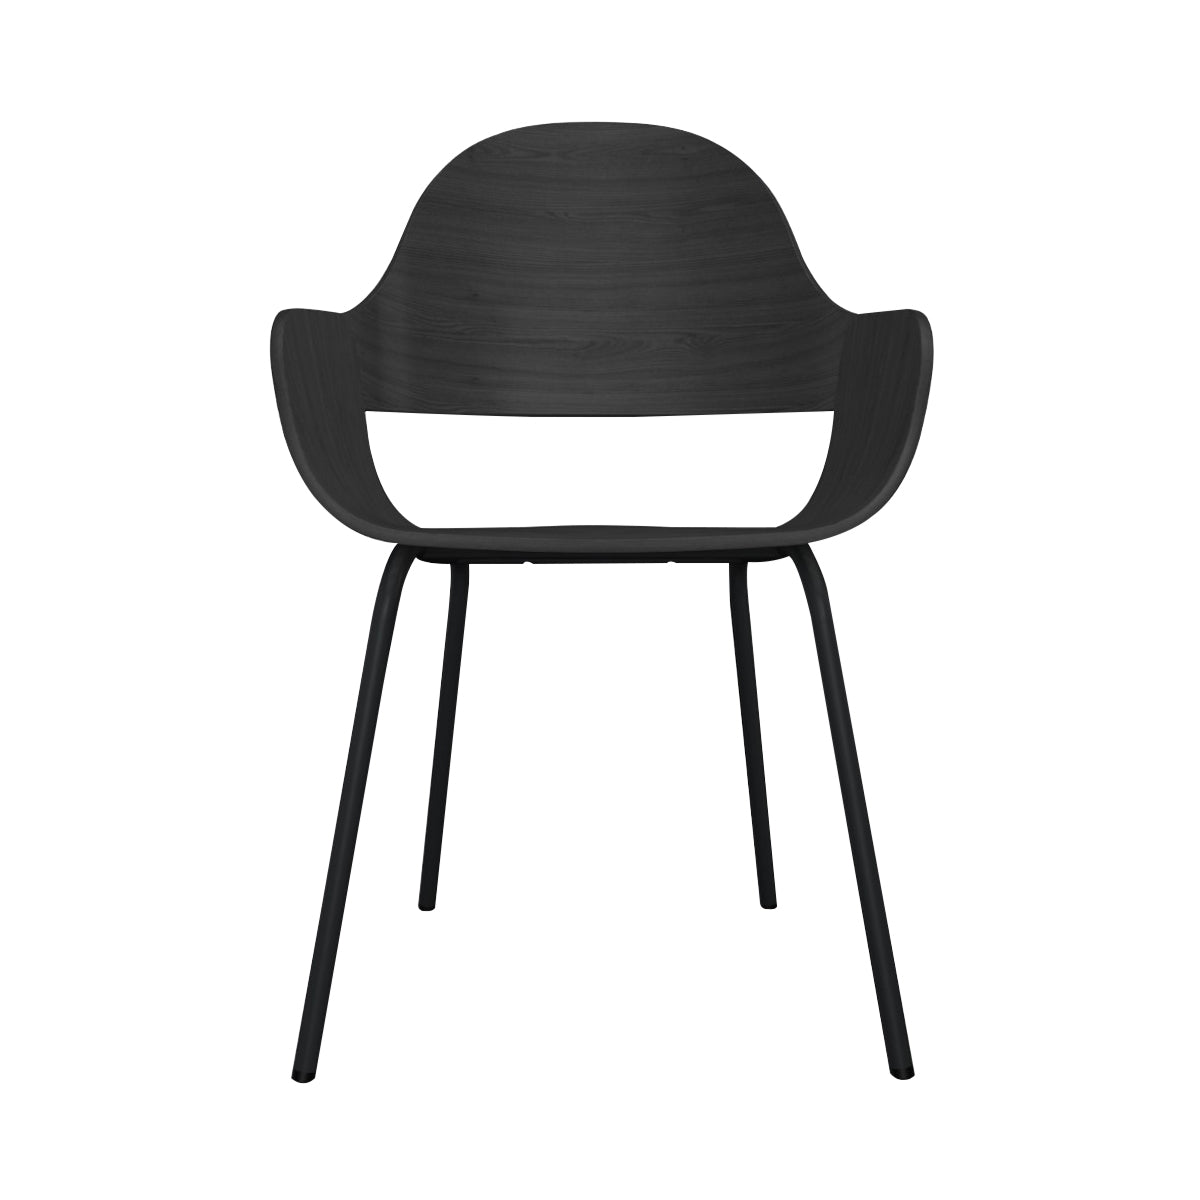 Showtime Nude Chair with Metal Base: Ash Stained Black + Anthracite Grey